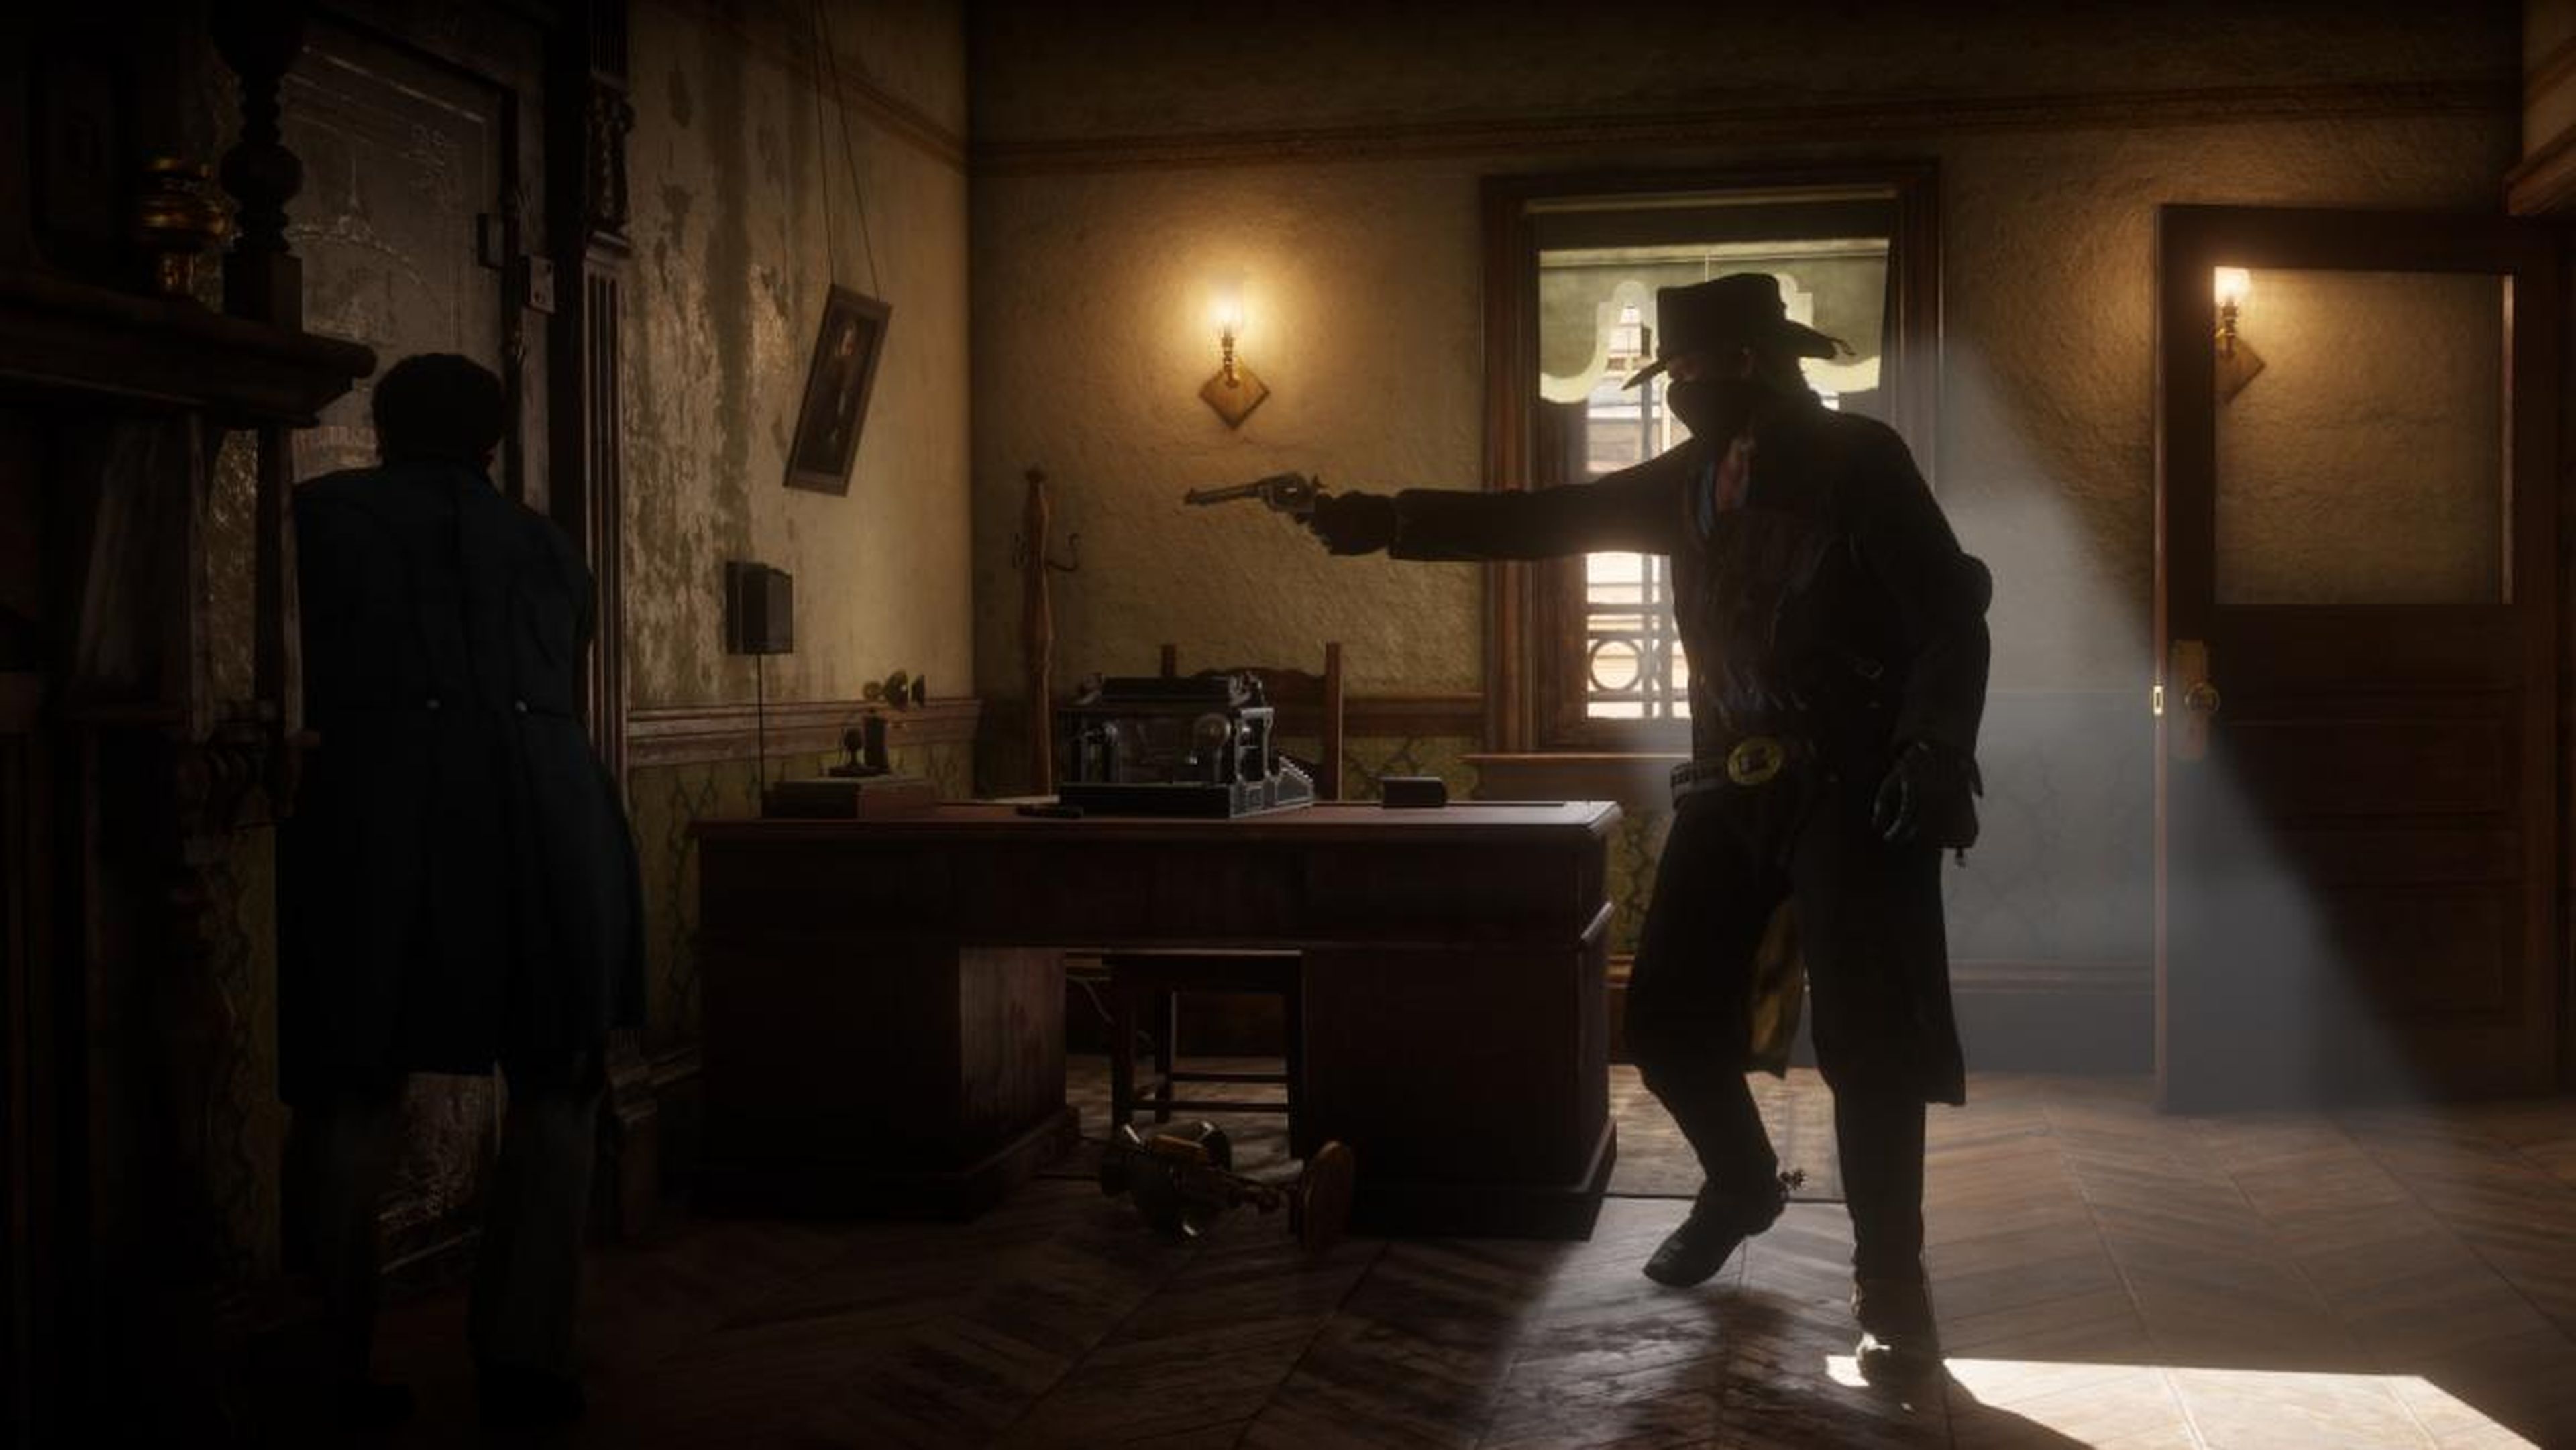 Despite Morgan's gang affiliations and outlaw life, "Red Dead Redemption 2" features a morality system that allows players to choose exactly how brutal they want to be.